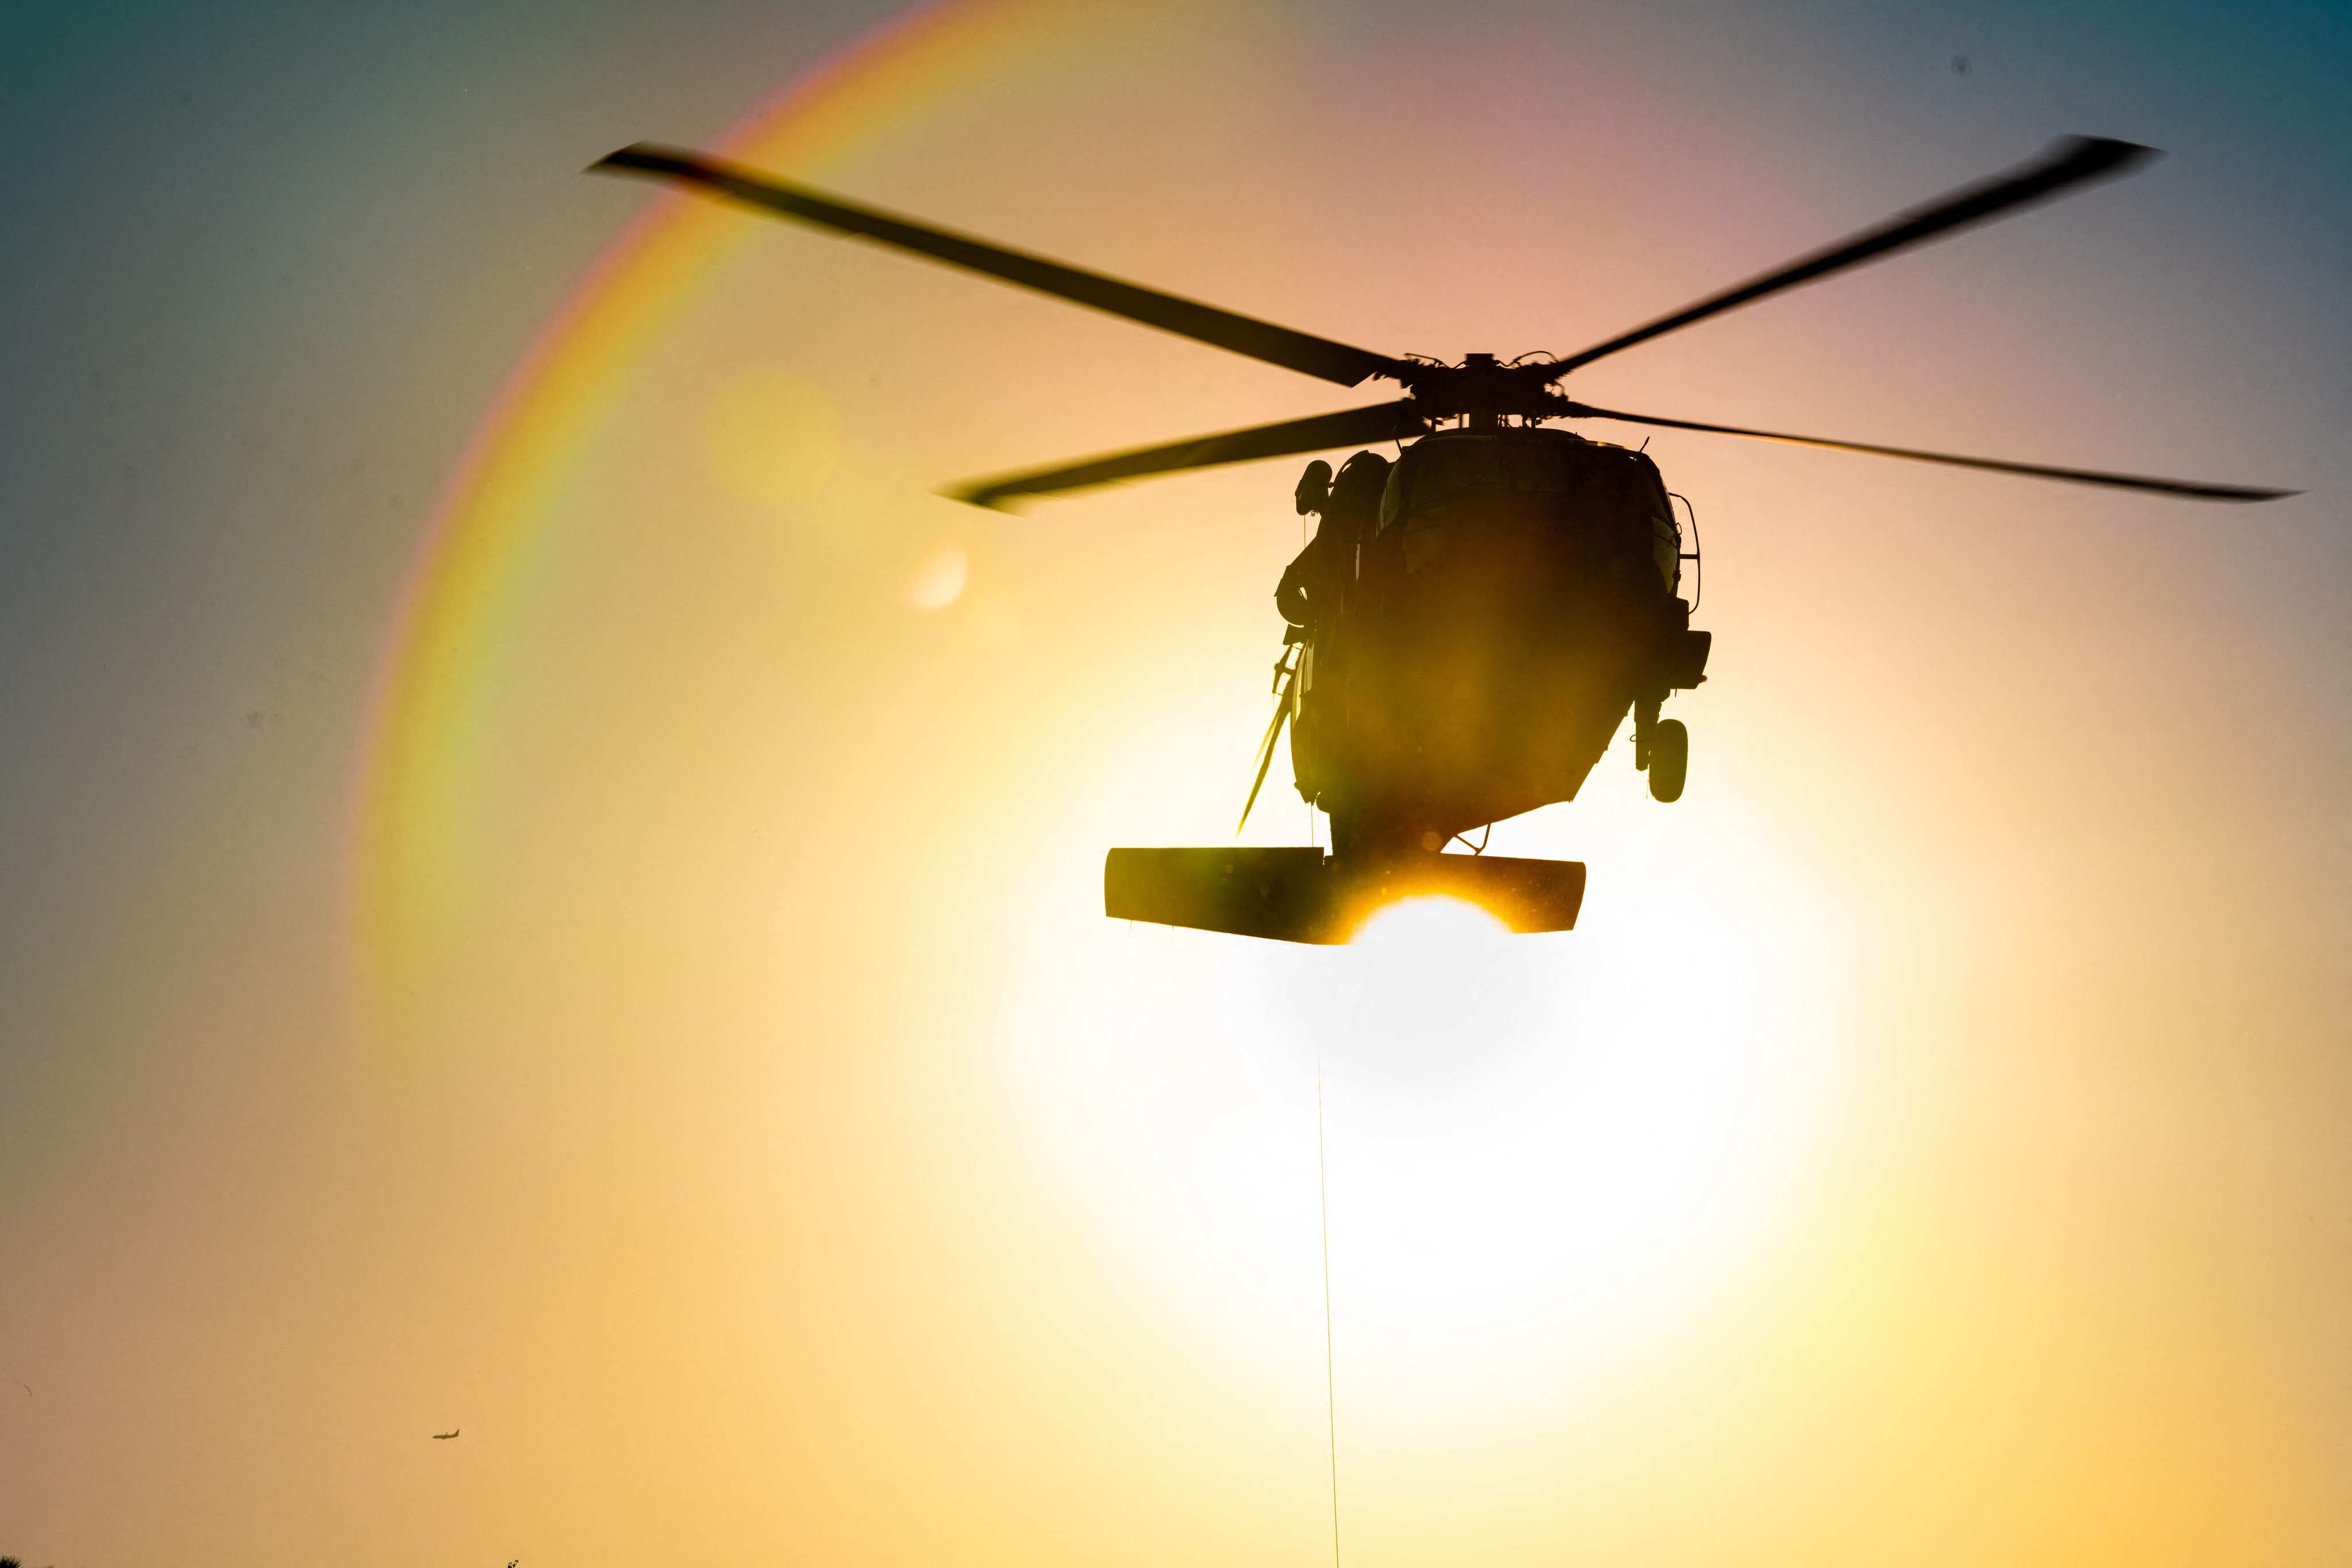 A UH-60 Black Hawk helicopter, like the one that has gone missing off an island in Japan. Photo: AFP